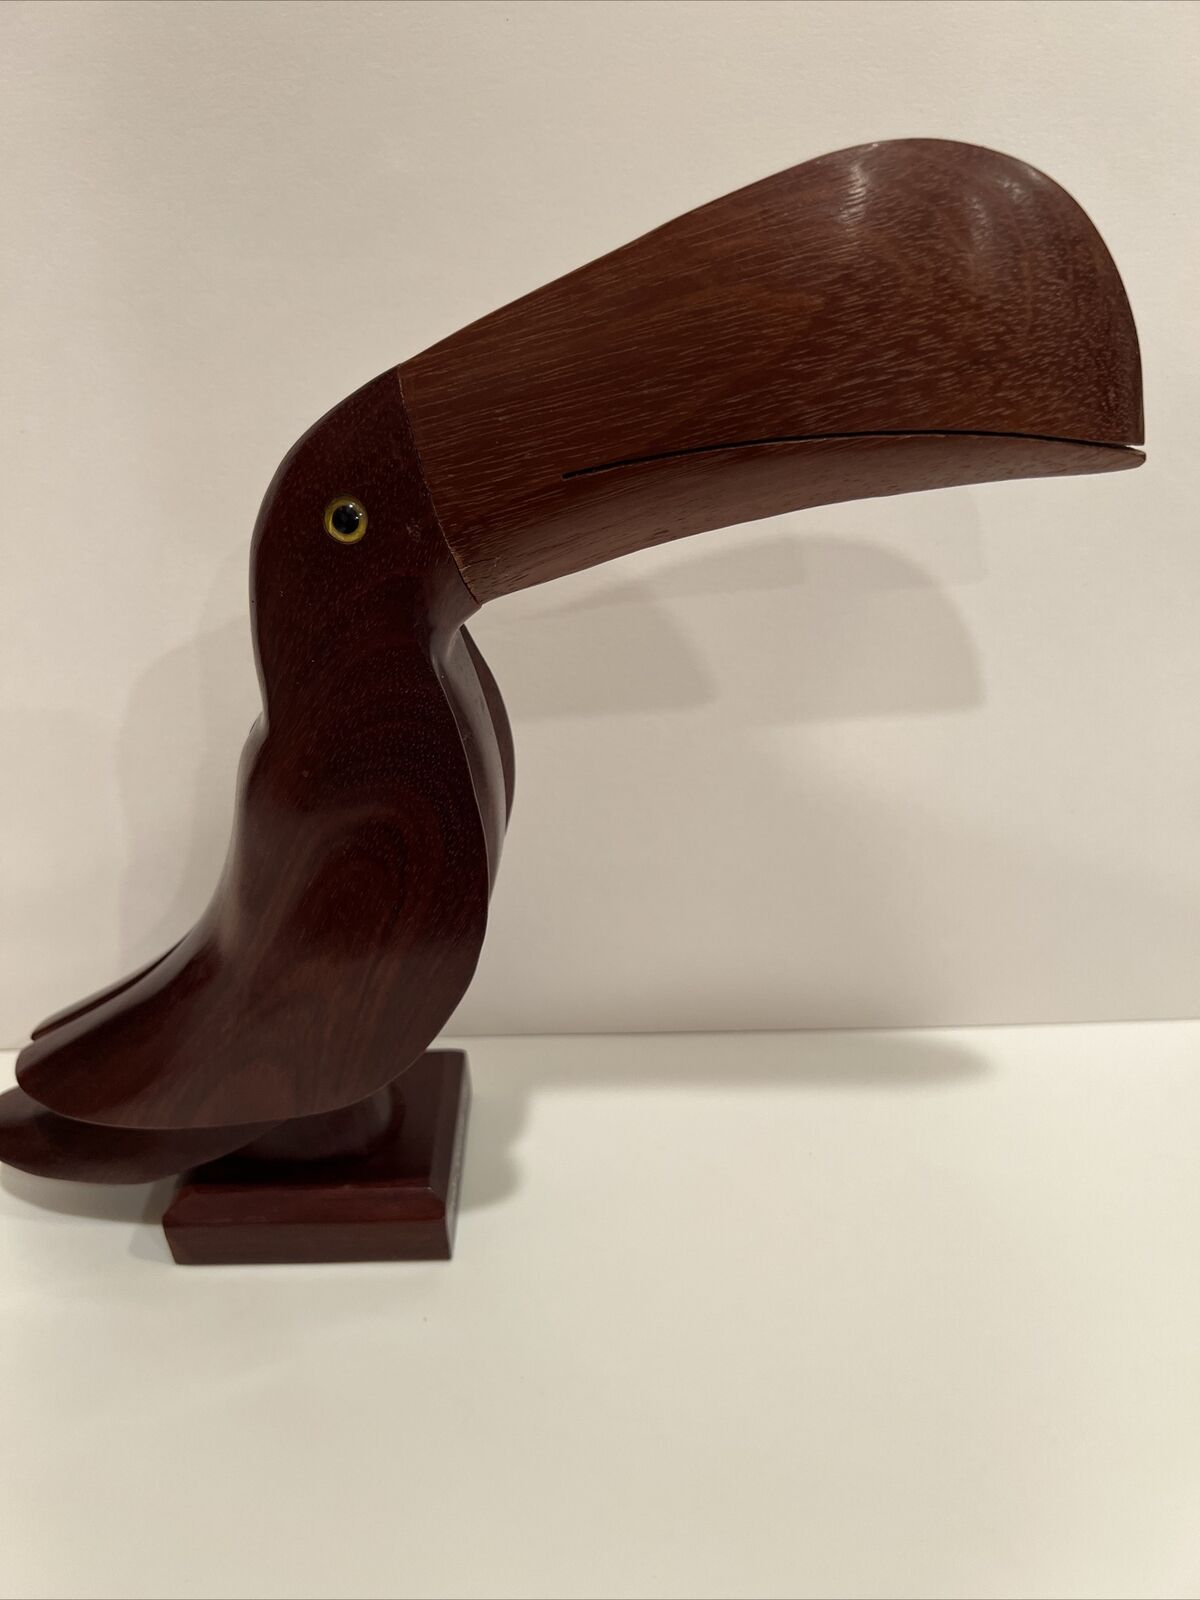 Vintage Toucan Sculpture of Hand Carved Made in Brazil.